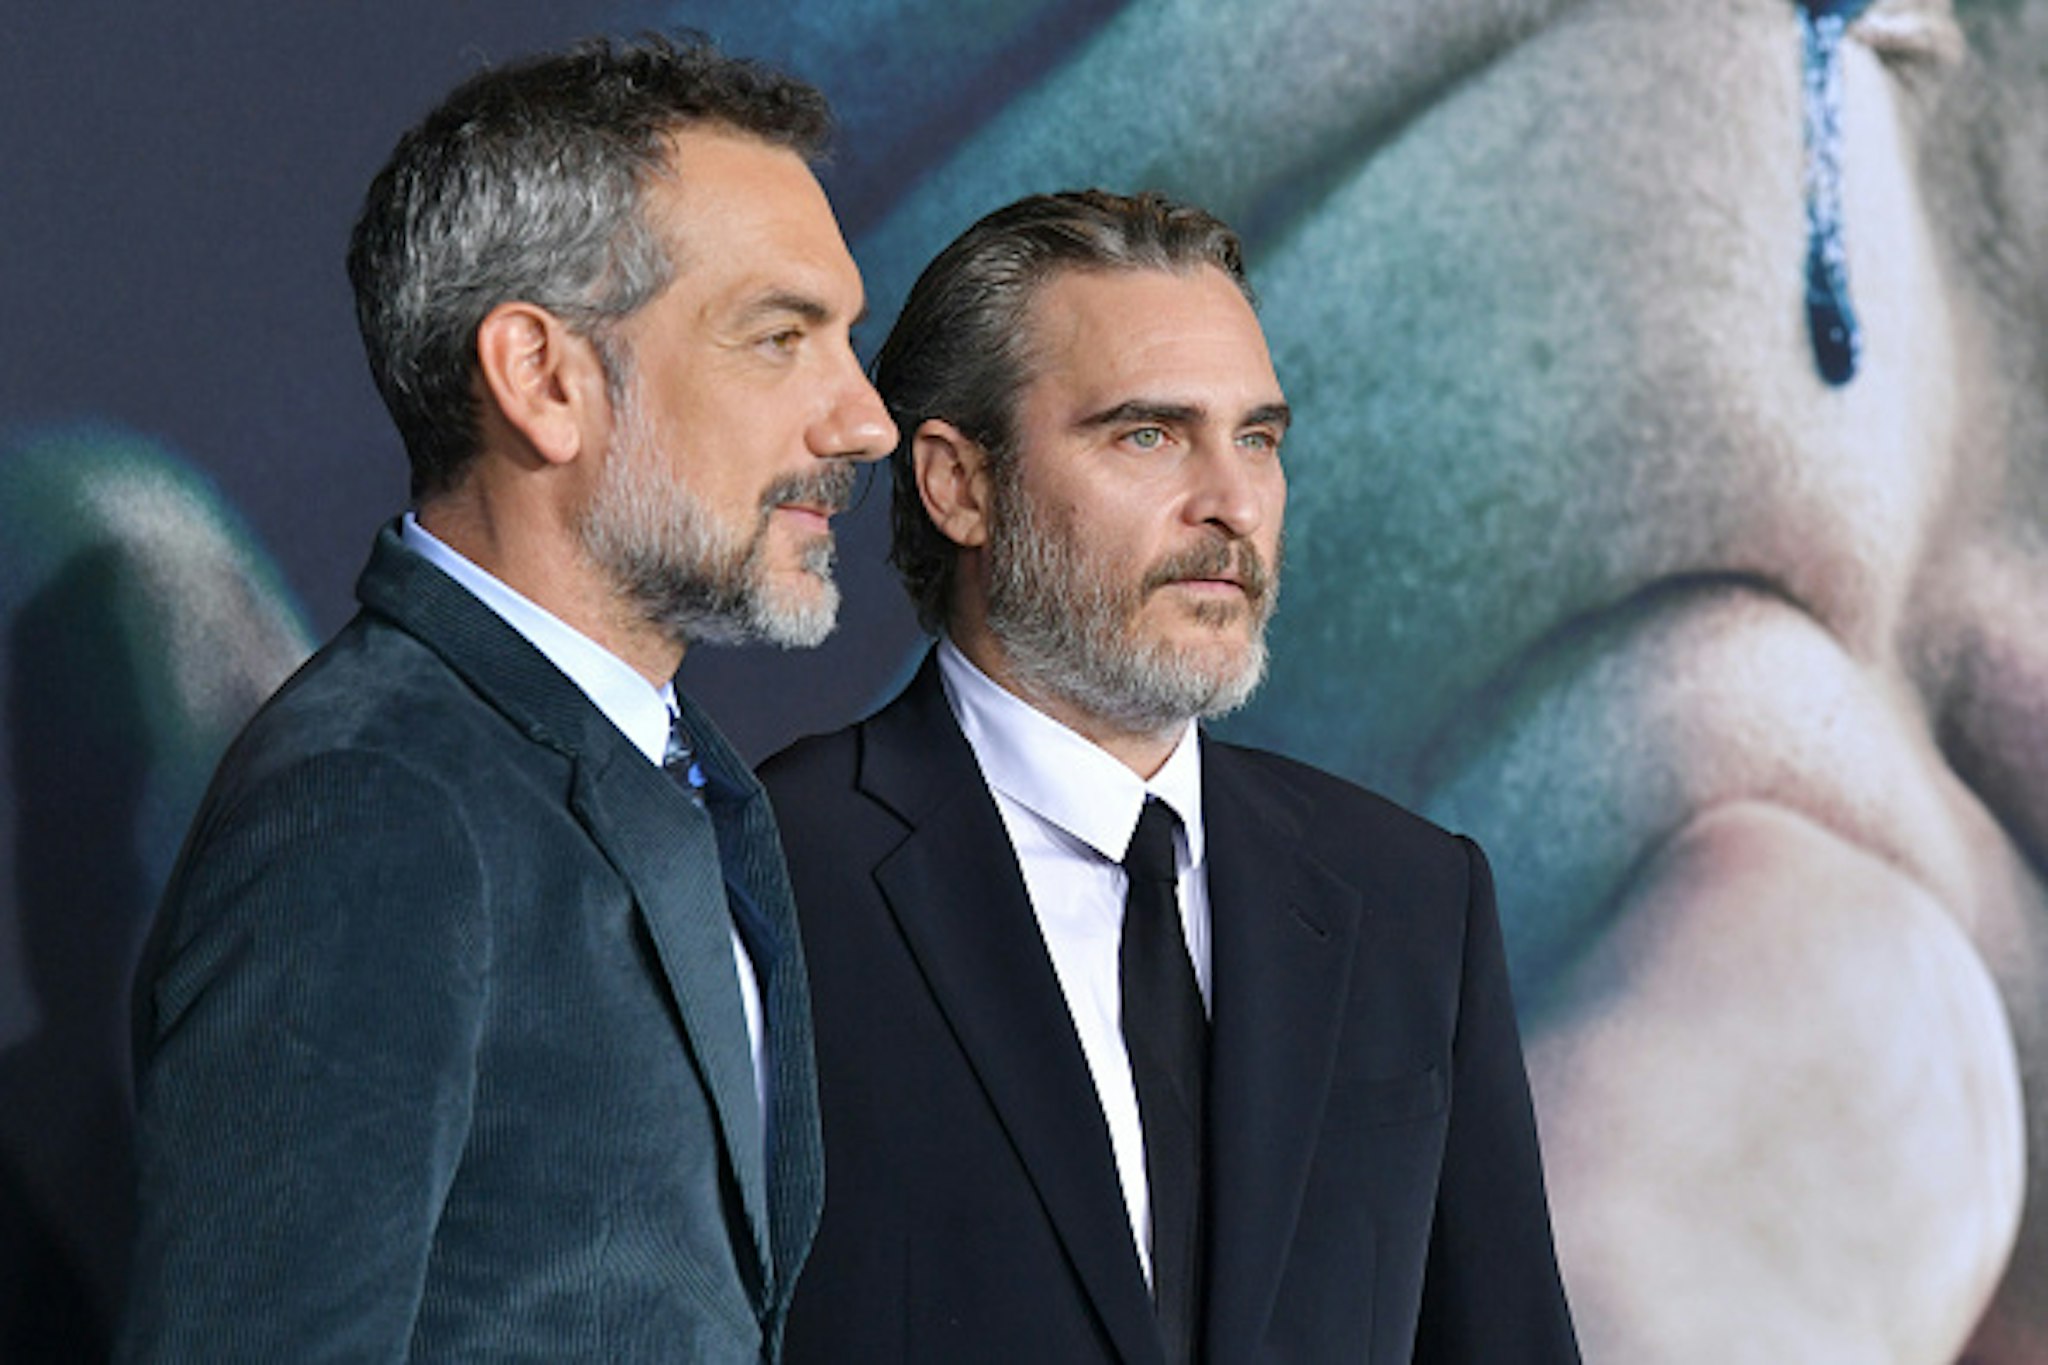 HOLLYWOOD, CALIFORNIA - SEPTEMBER 28: Todd Phillips and Joaquin Phoenix attend the premiere of Warner Bros Pictures "Joker" on September 28, 2019 in Hollywood, California.